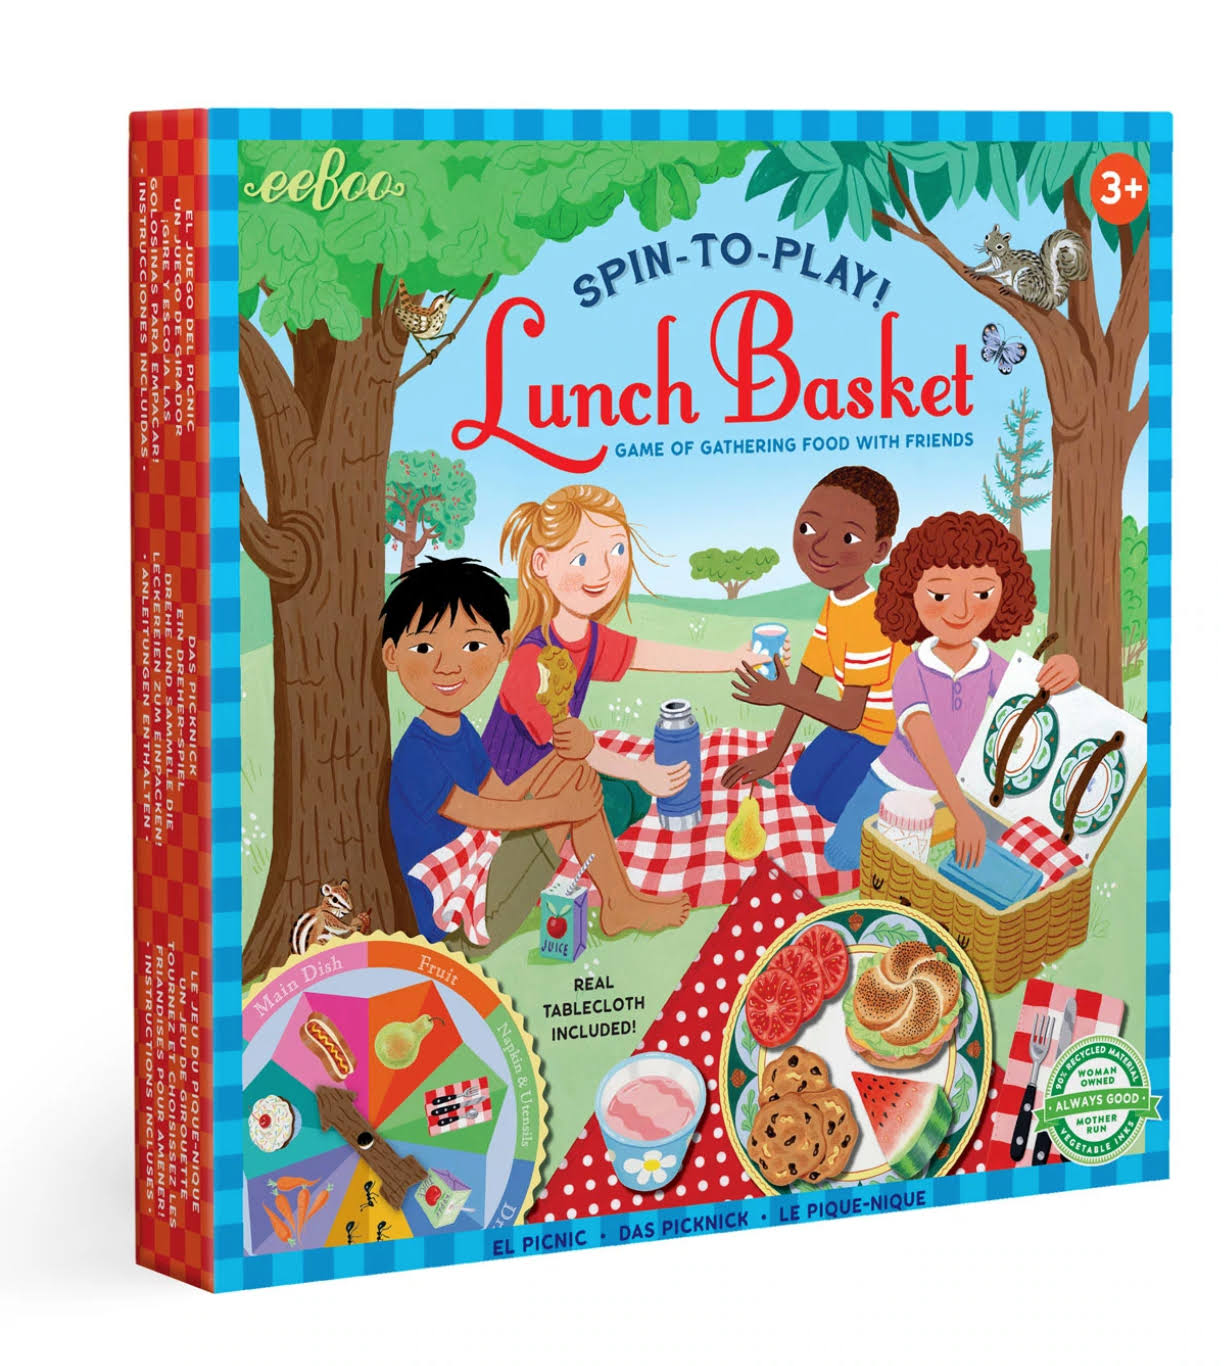 eeBoo Spin To Play Lunch Basket